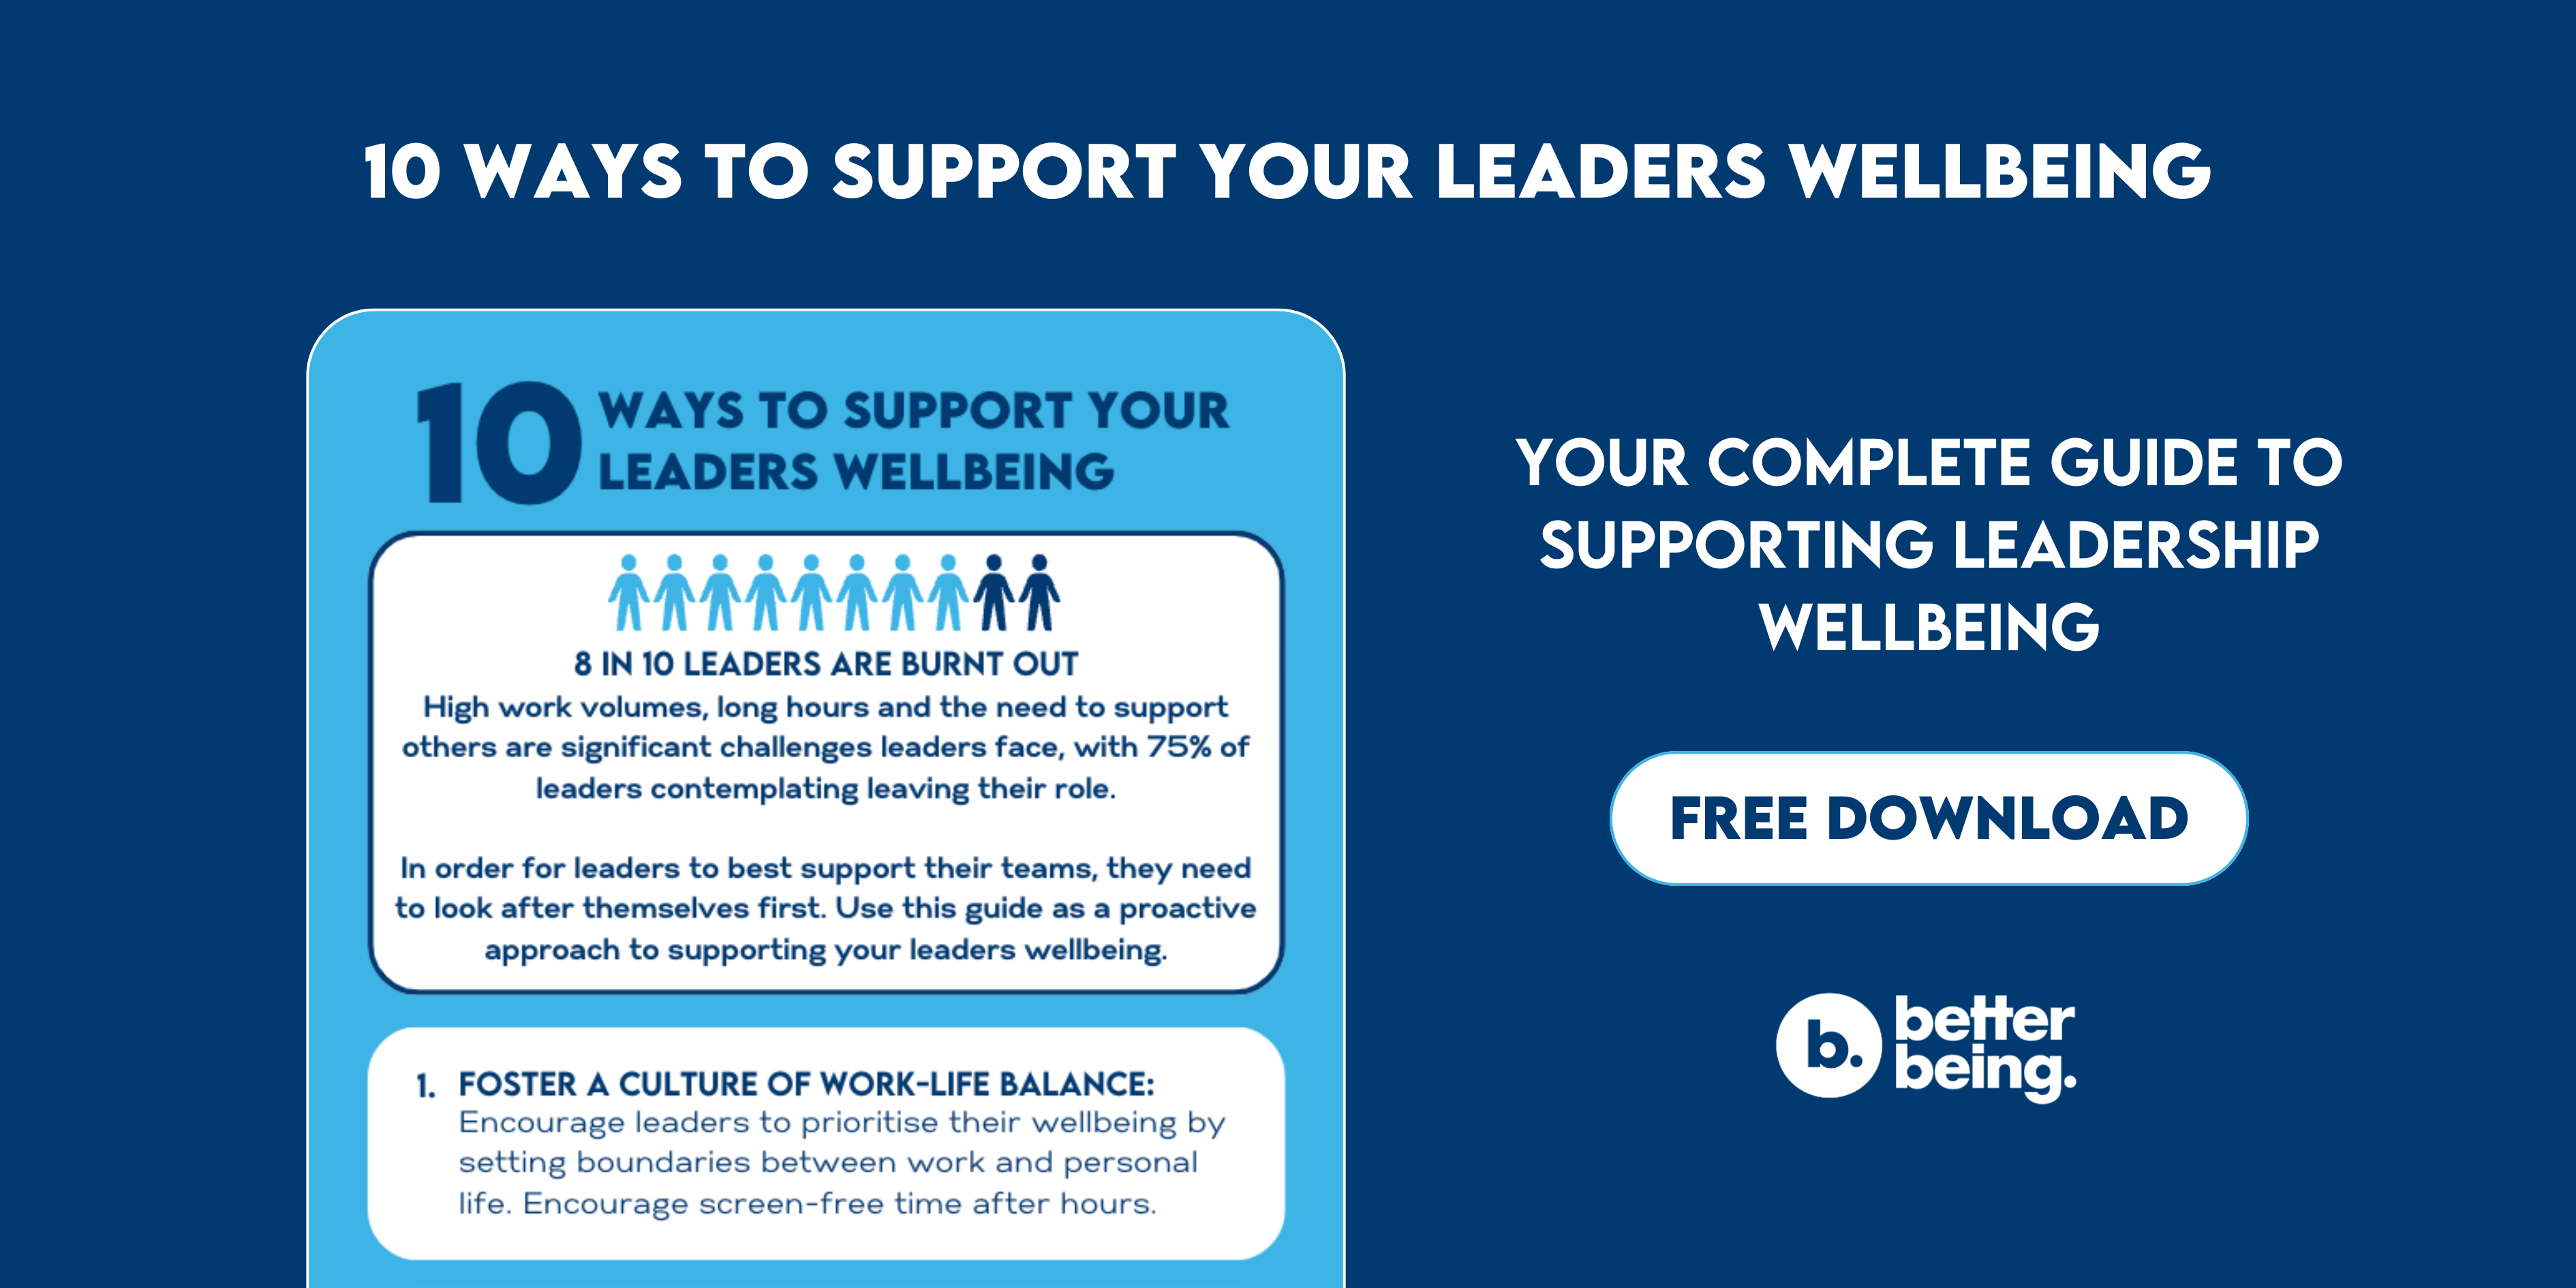 10 Ways to Support Leadership Wellbeing